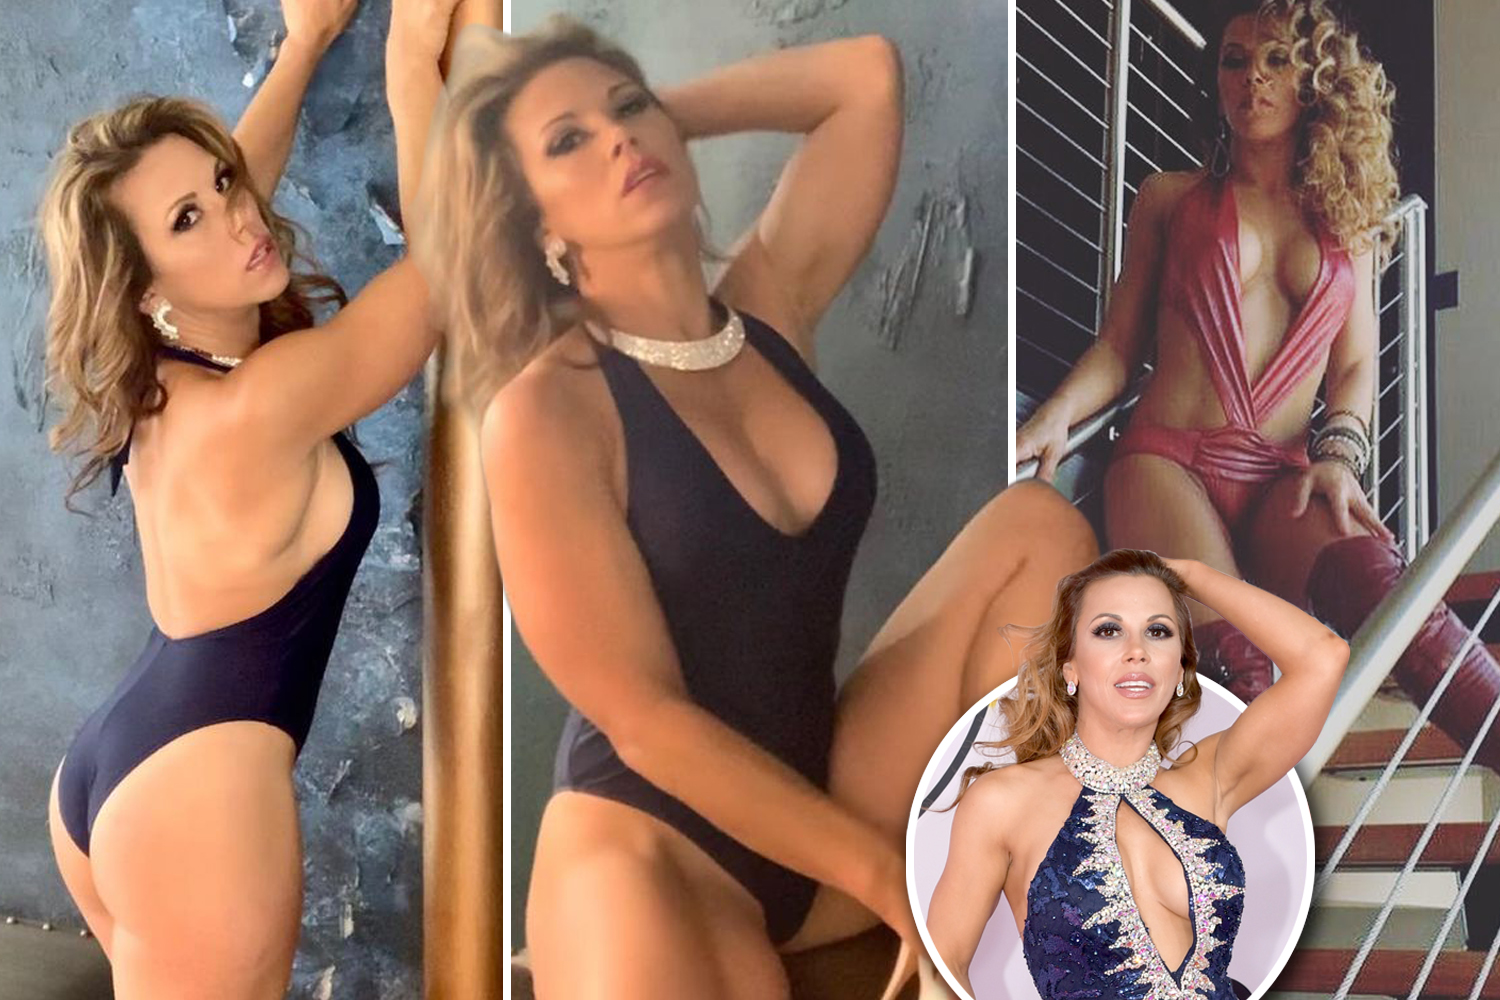 dawn lightfoot recommends wwe mickie james nude pic